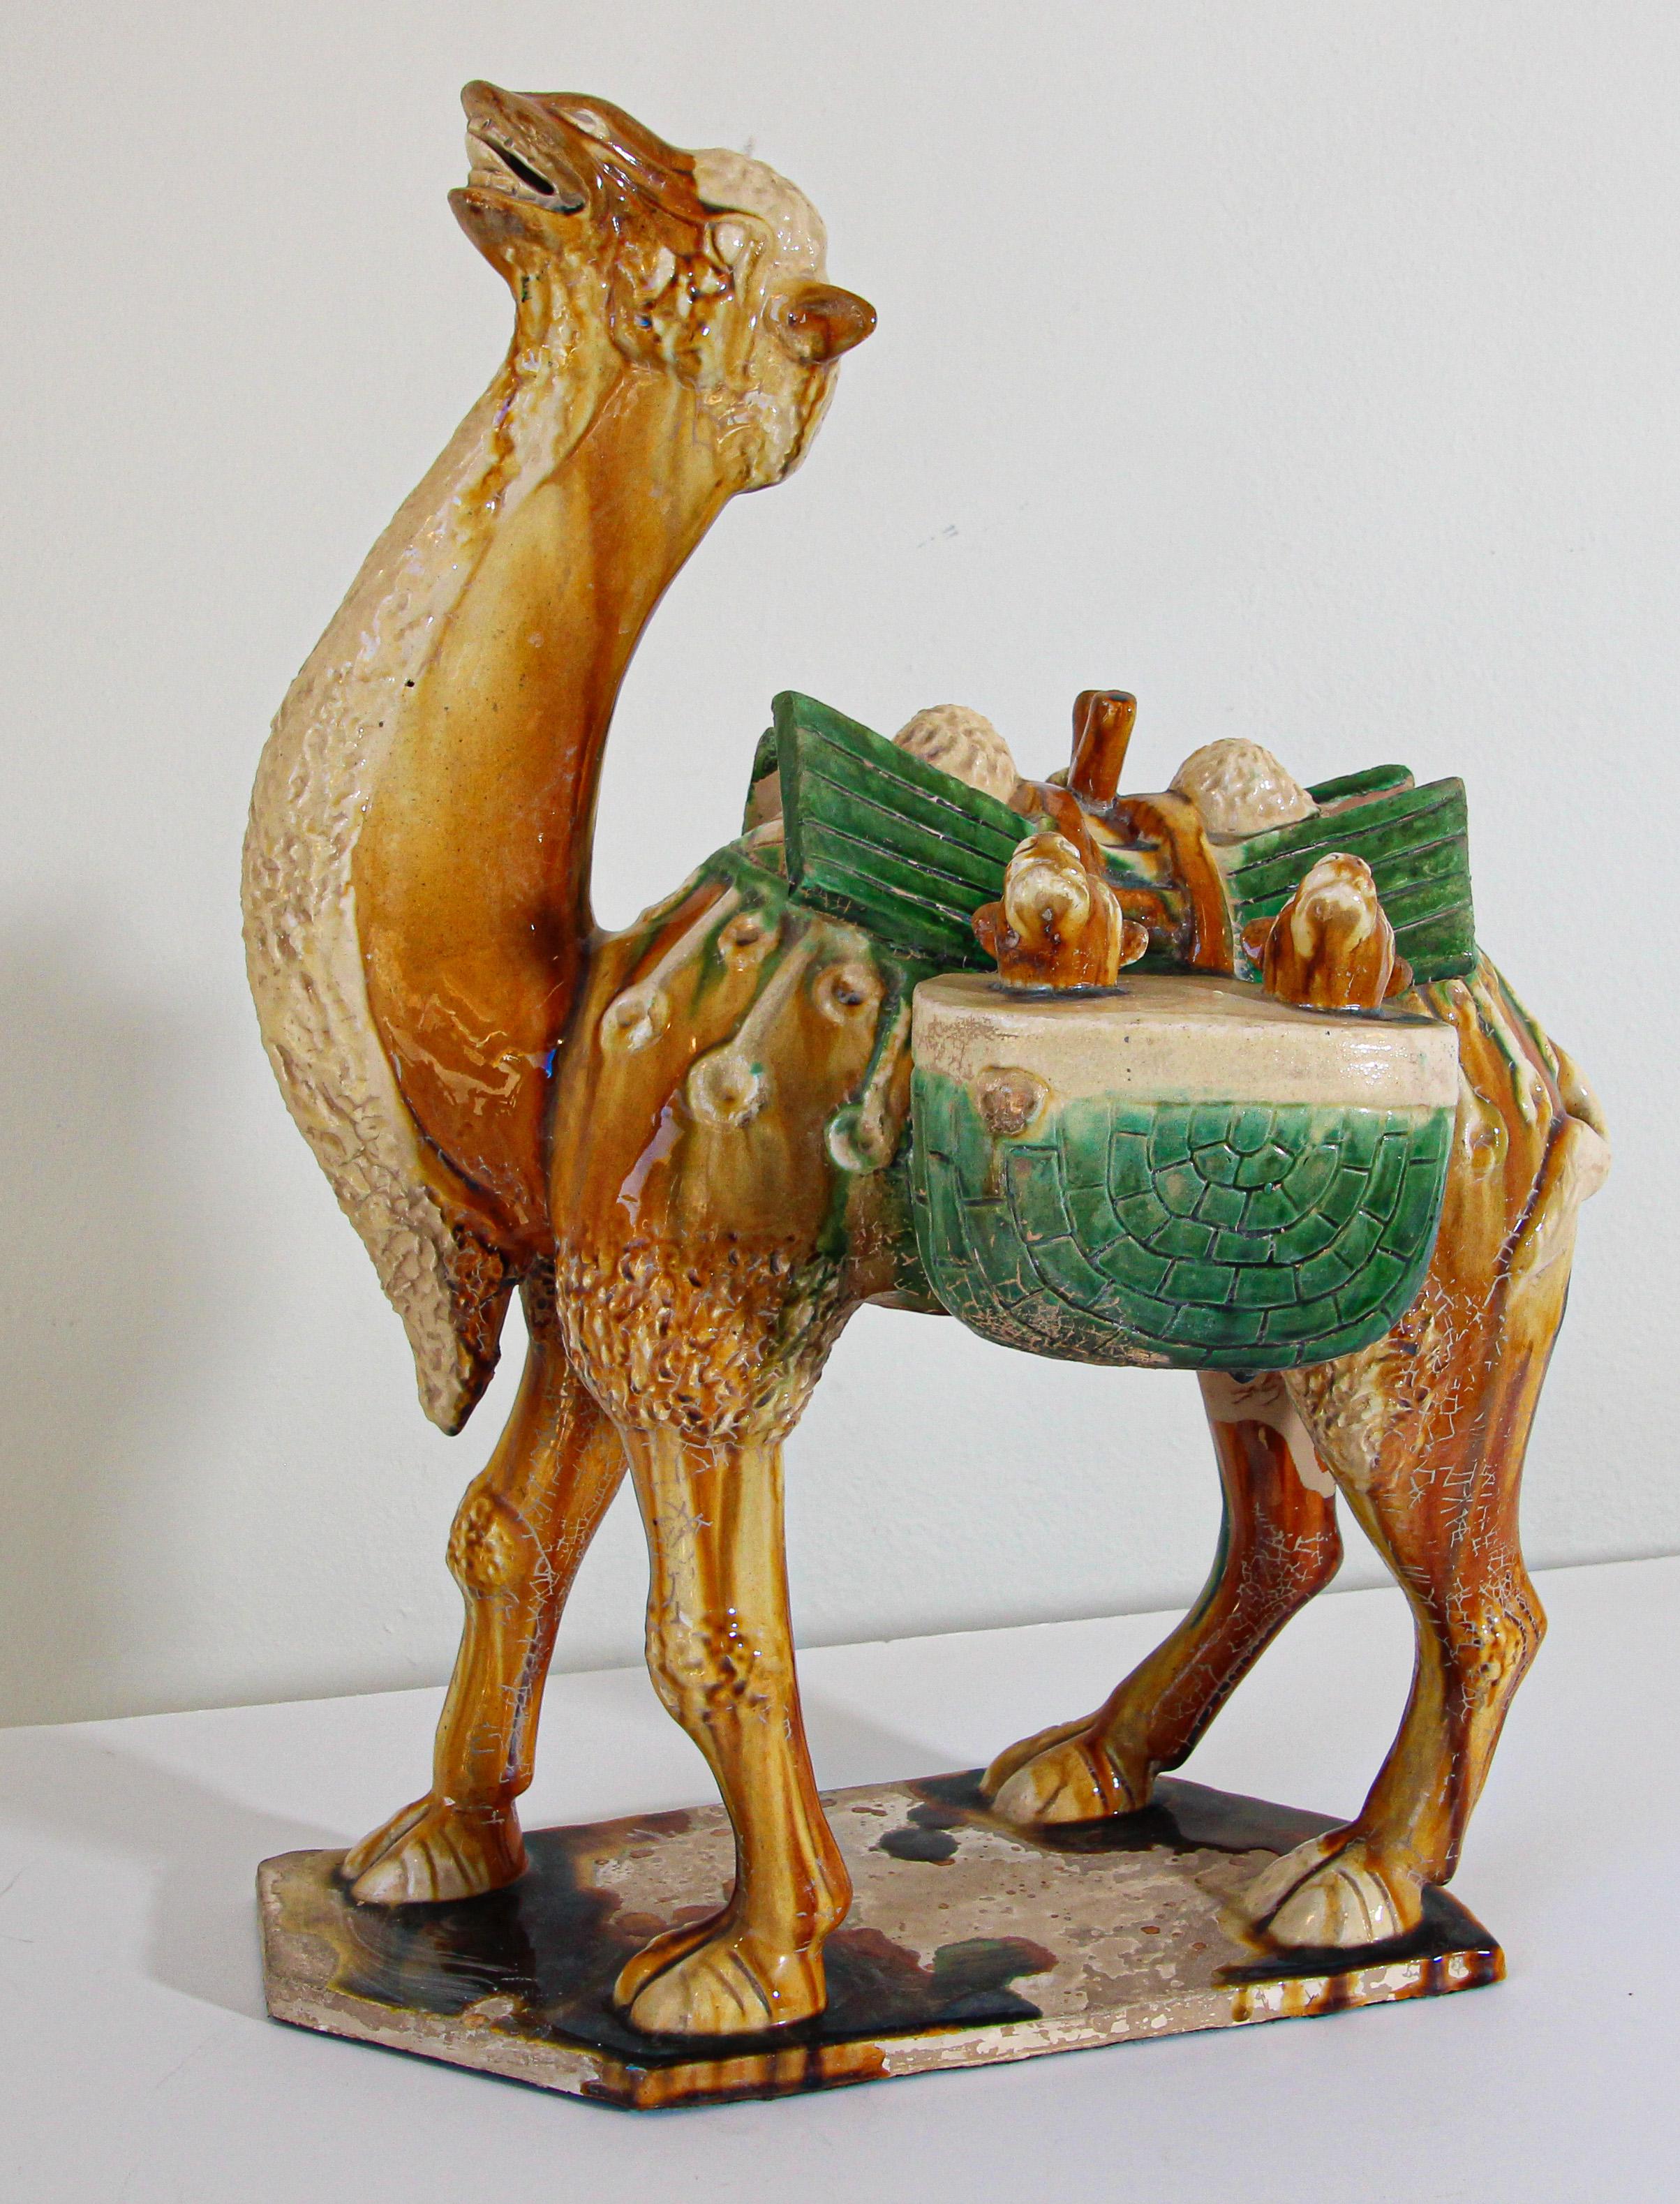 Vintage Sancai glazed blue pottery figure of a camel Chinese Tang Dynasty manner.
A wonderful large Chinese Tang-style glazed pottery figure of a camel carrying goods.
Made from traditional glazed ceramic in glossy orange and green, glazed and